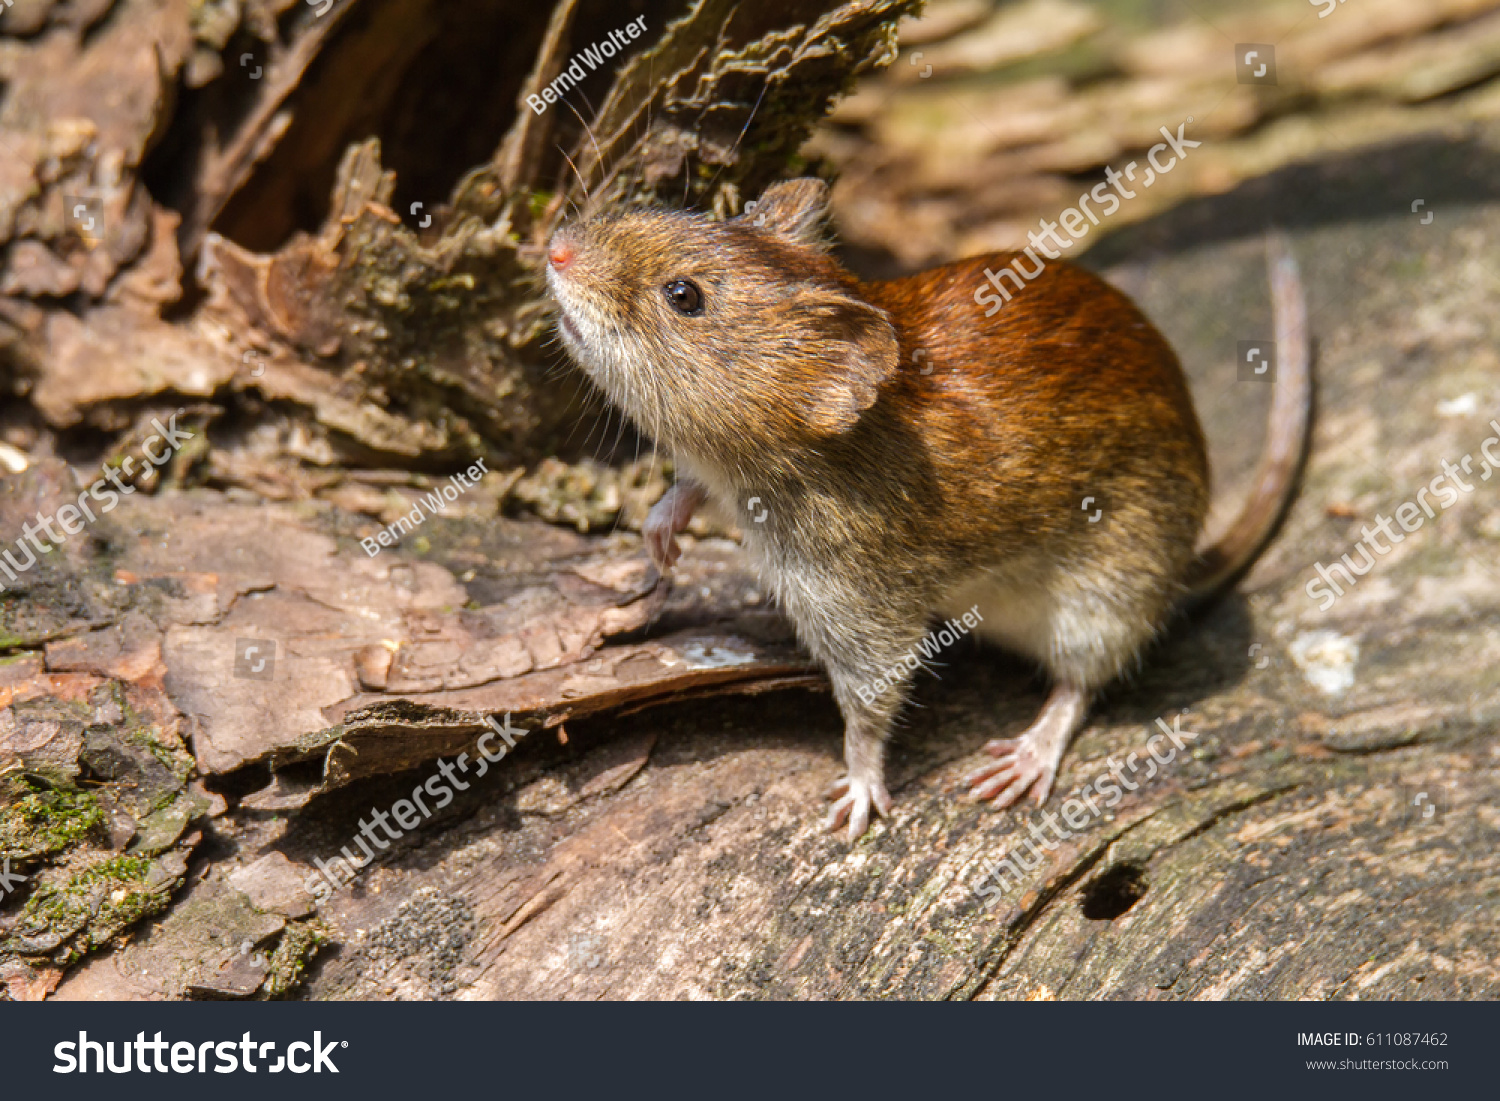 Bank vole mouse in forest #611087462